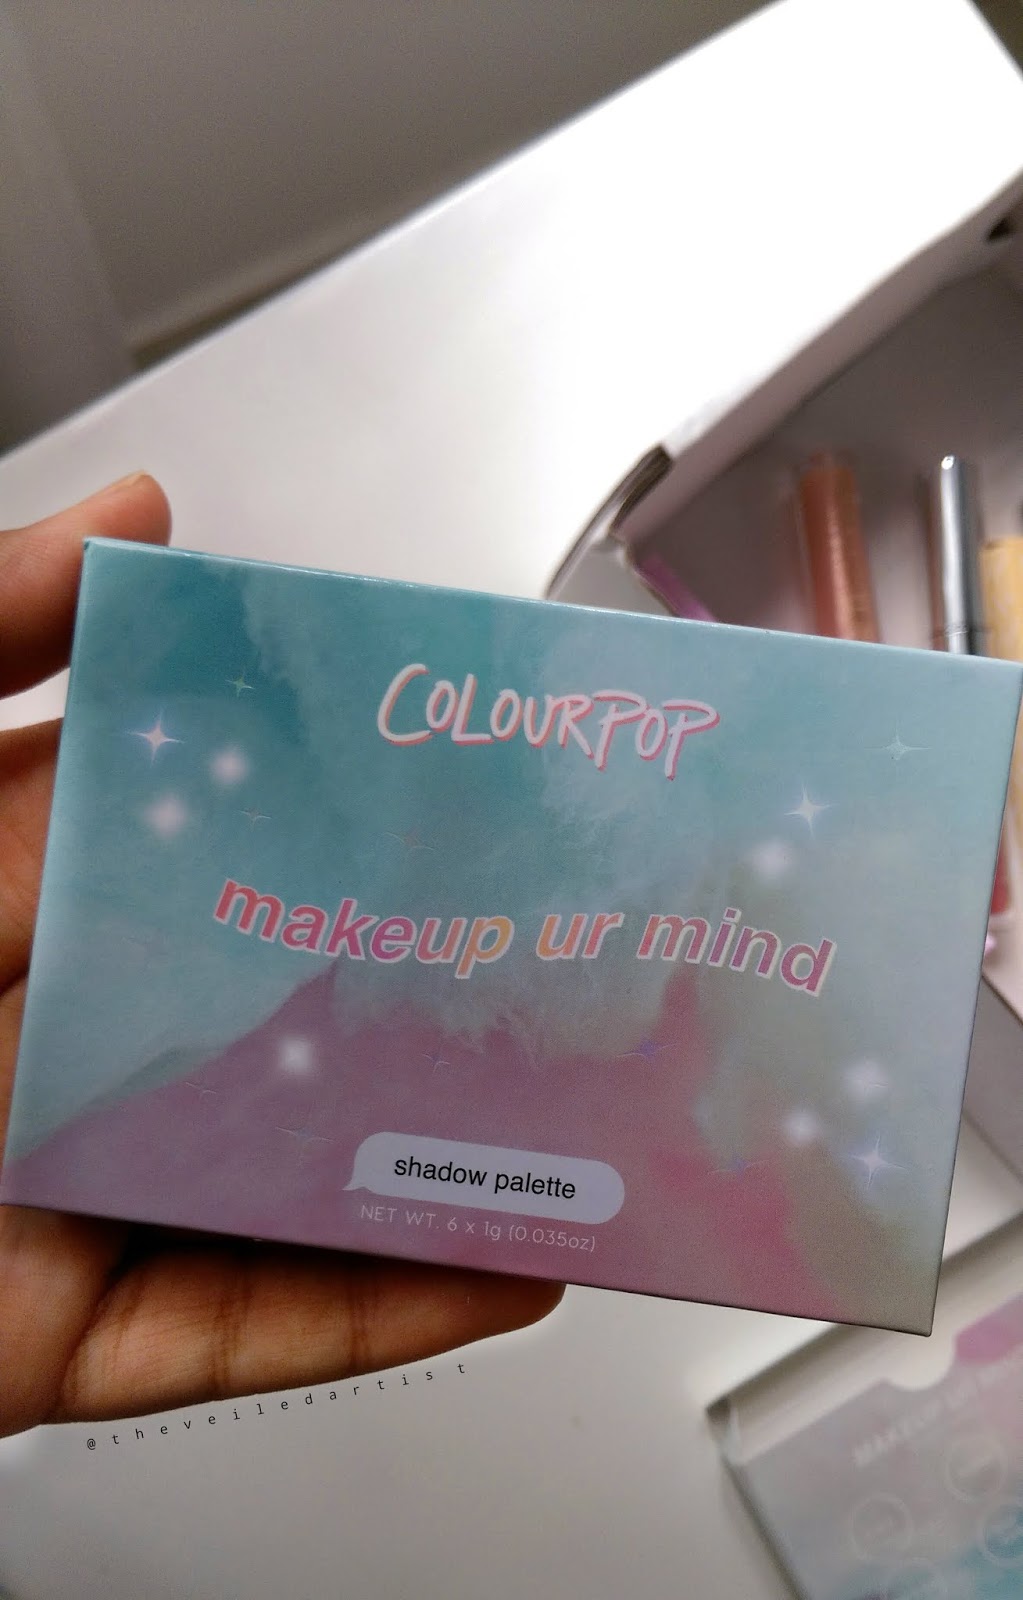 Colourpop Makeup Your Mind Palette Full Review and Swatches - The ...